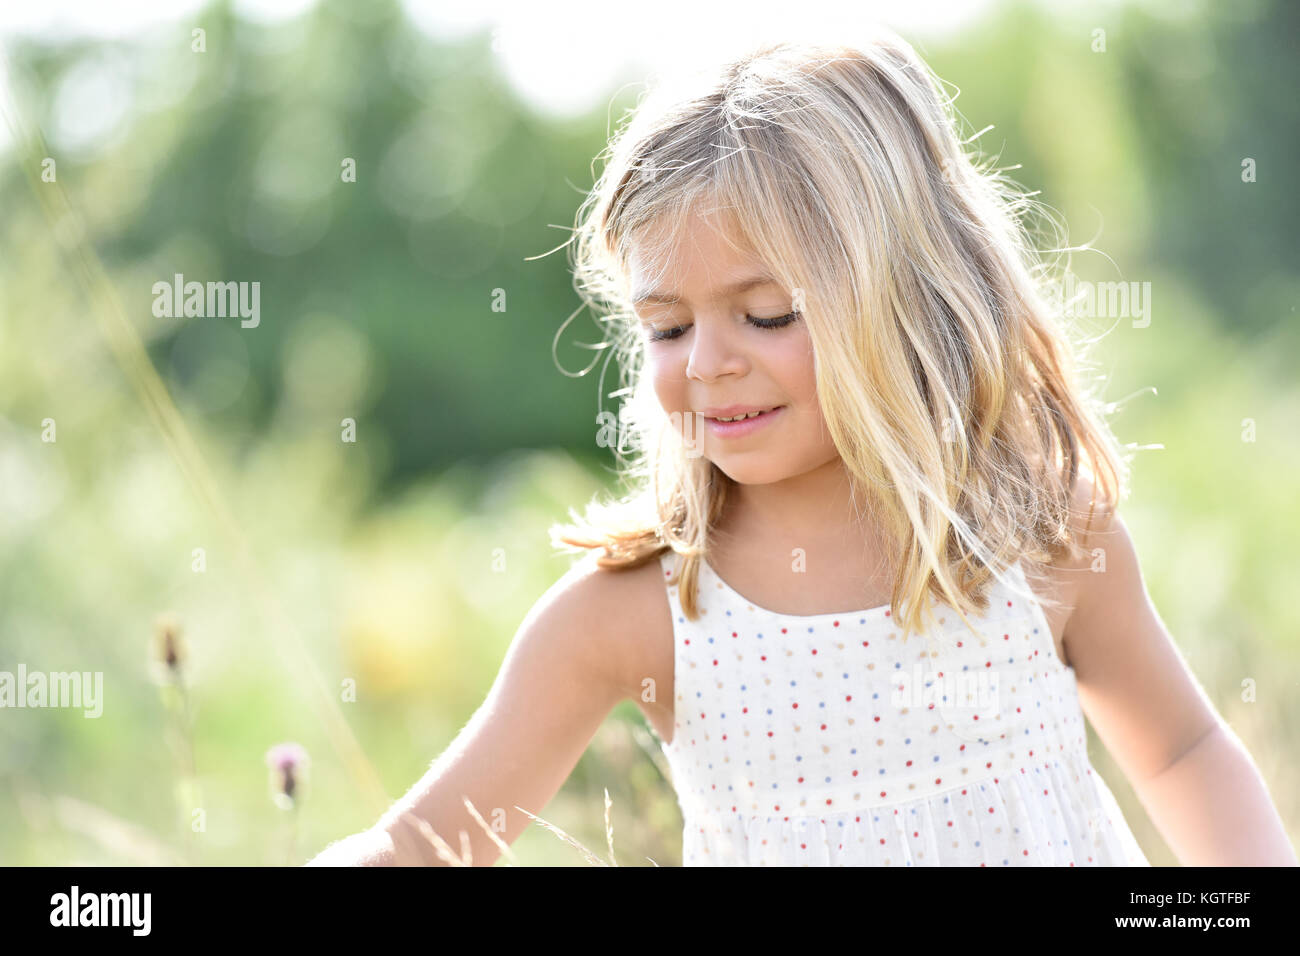 Portrait of cute petite blonde girl Picking Flowers in field Banque D'Images